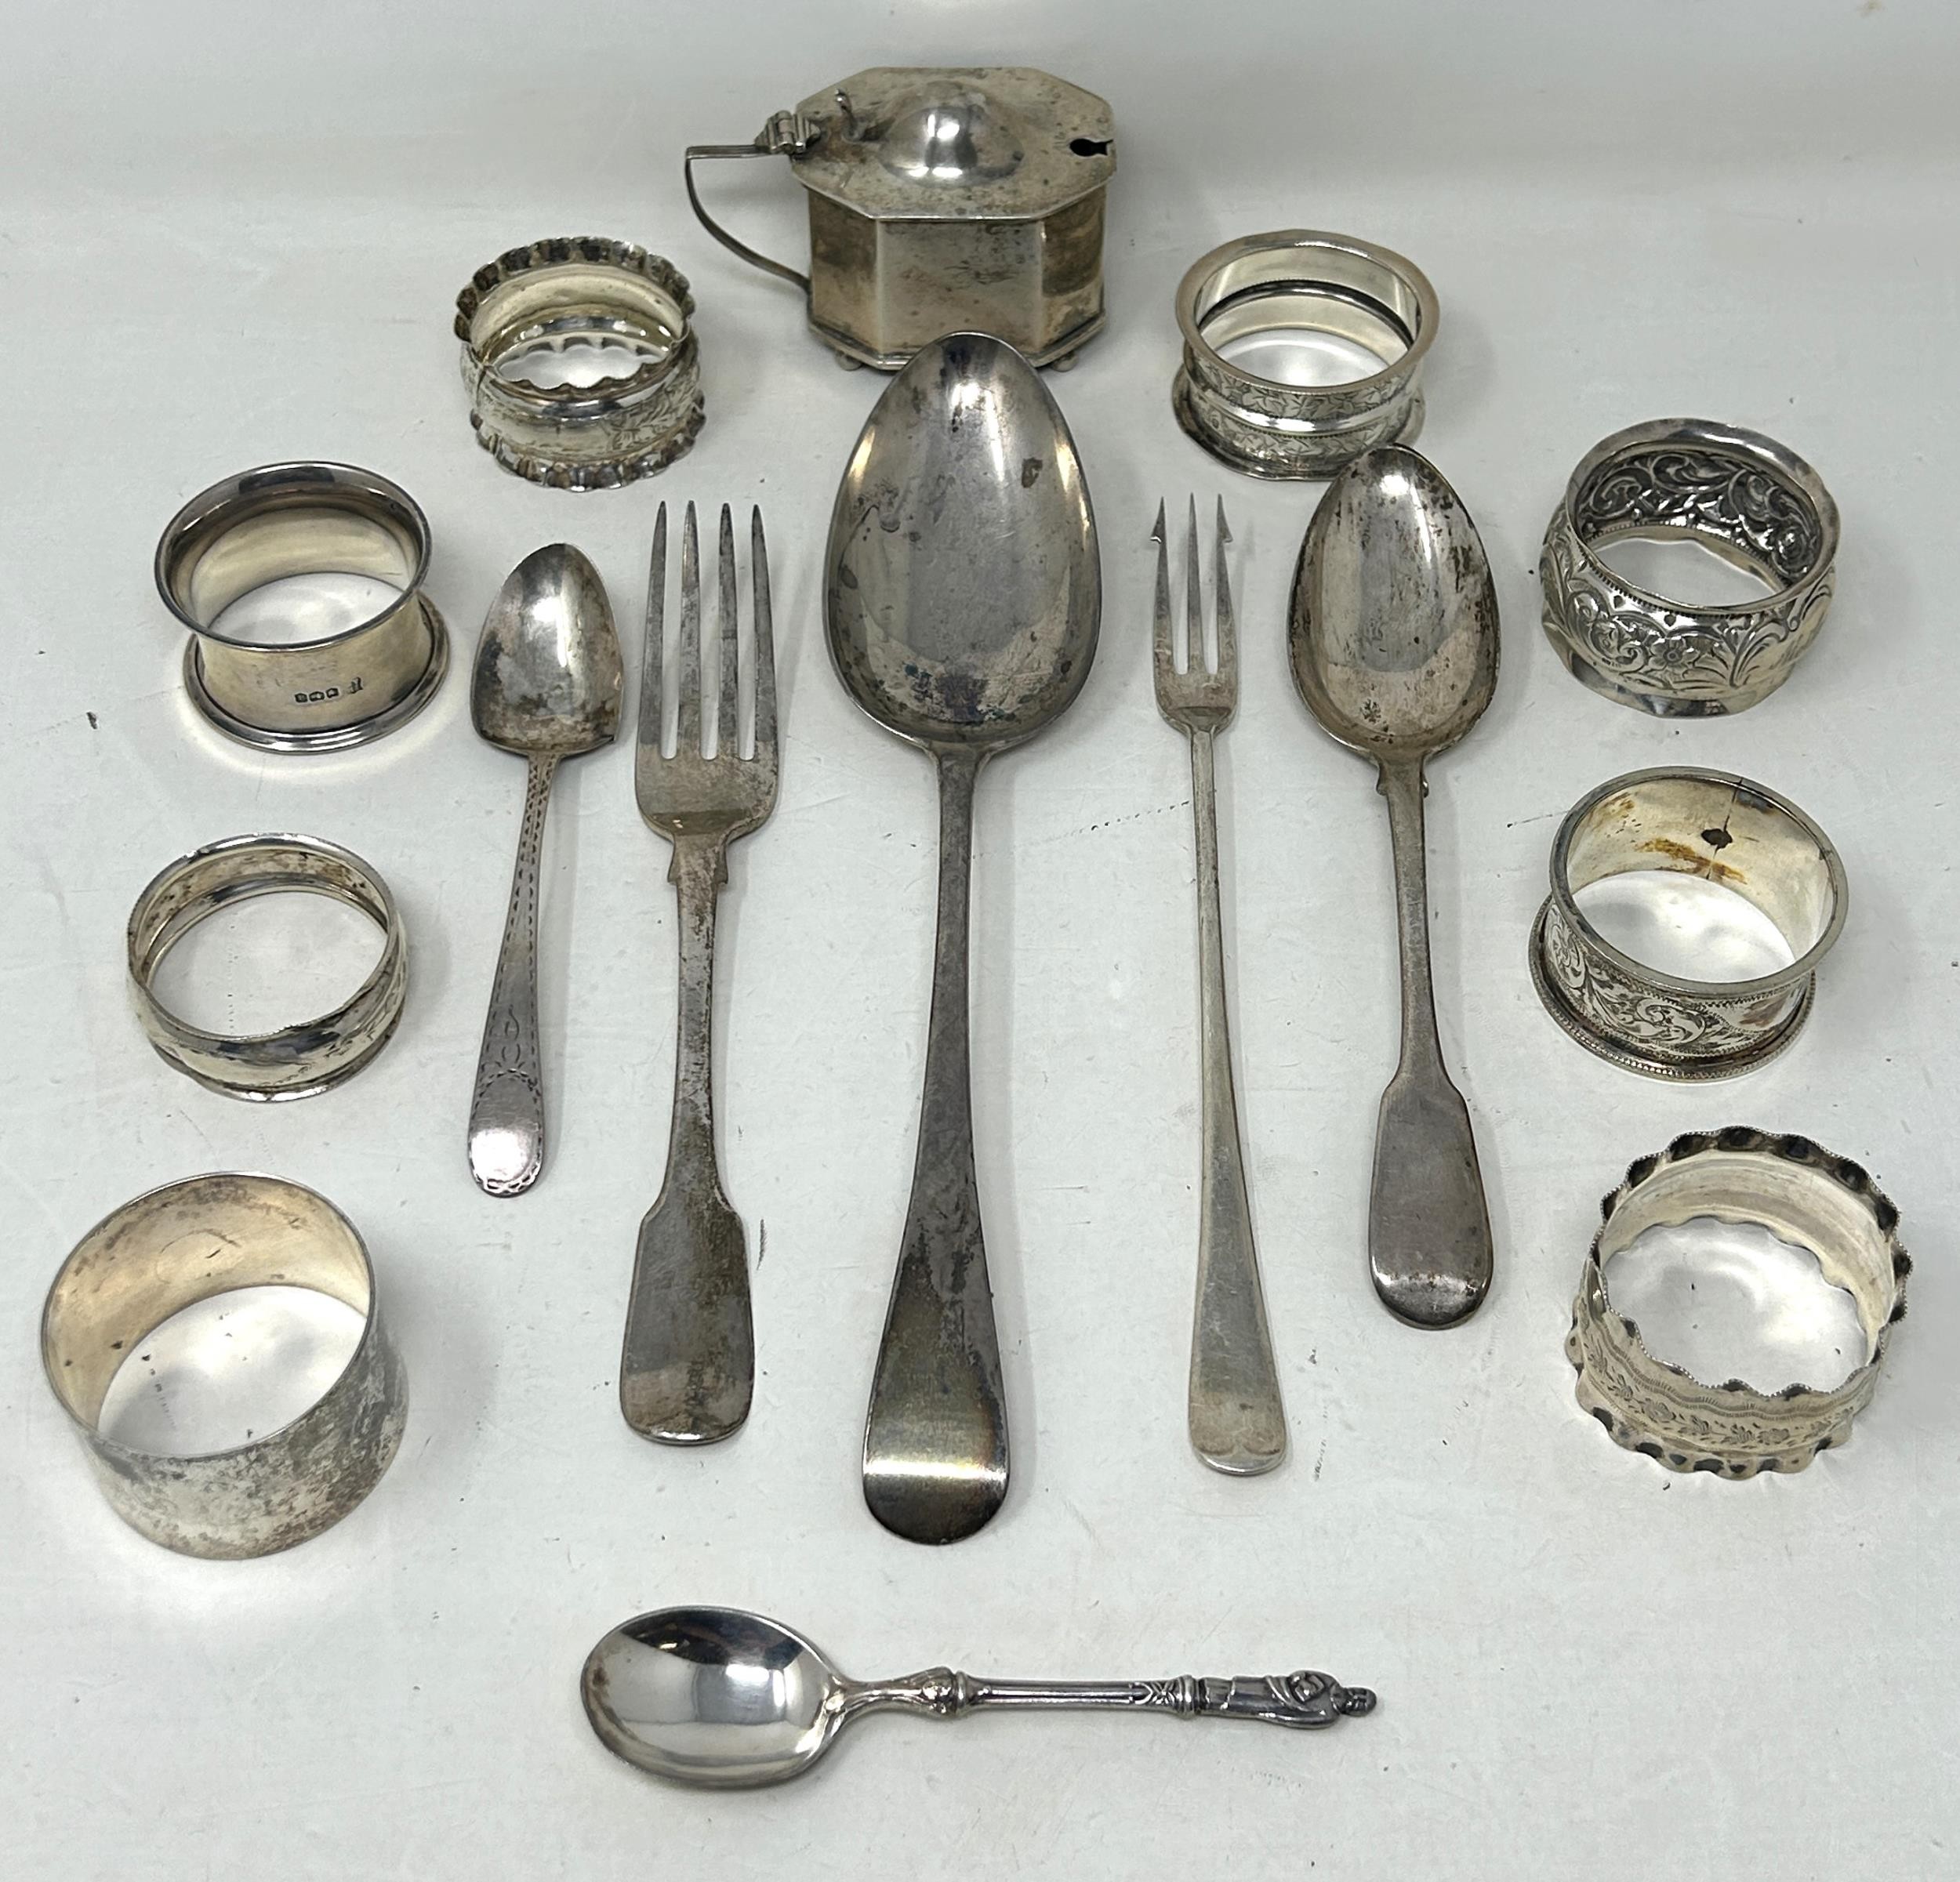 A silver Old English pattern spoon, assorted napkin rings, a mustard pot, and flatware, various